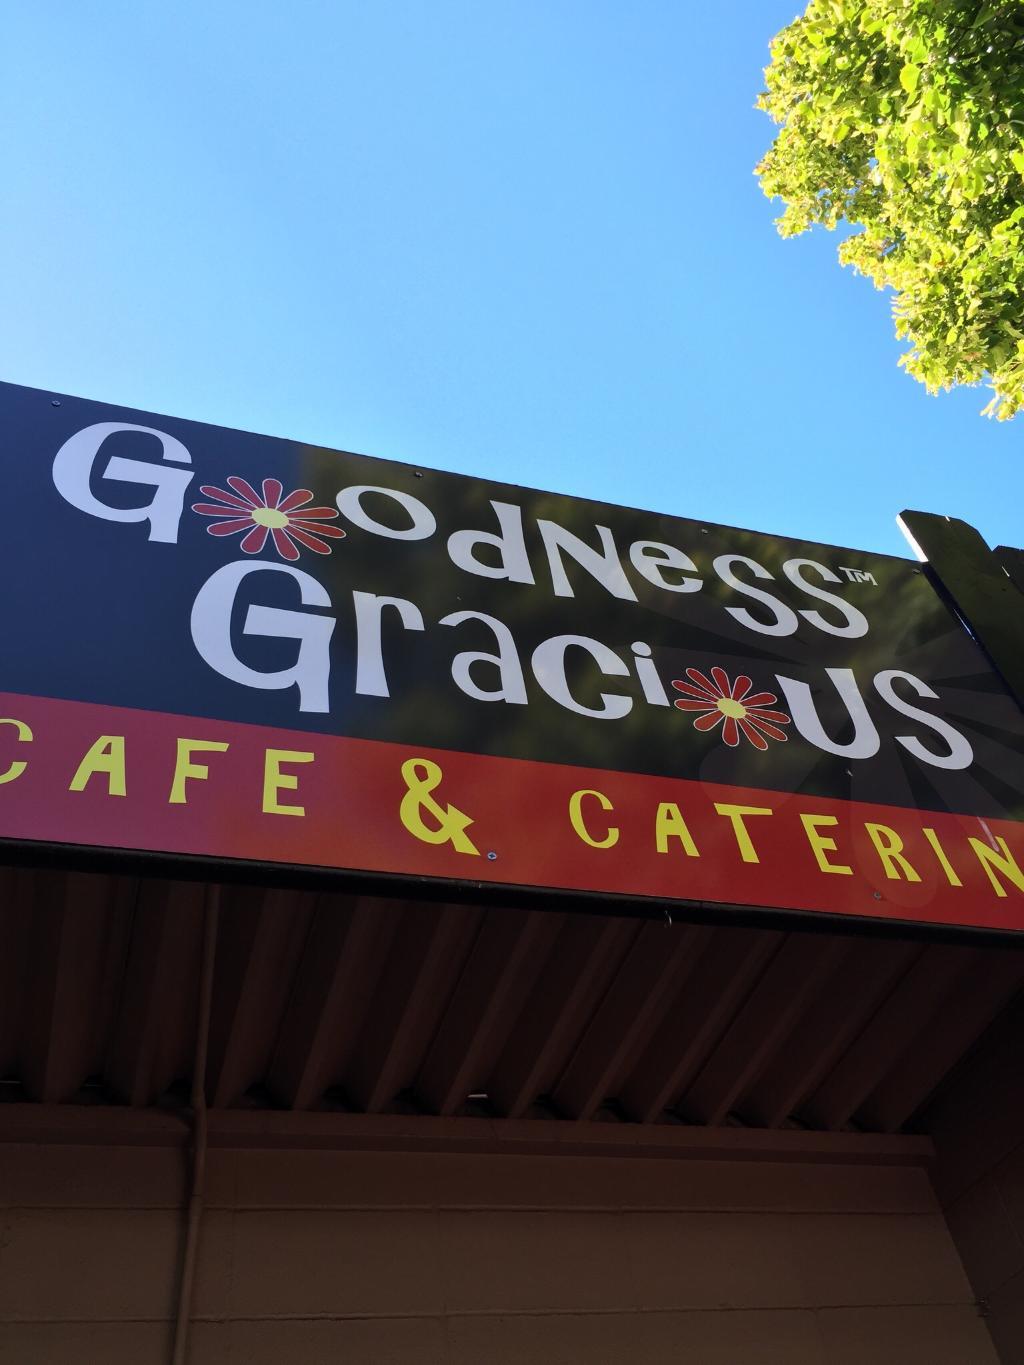 Goodness Gracious Cafe & Catering